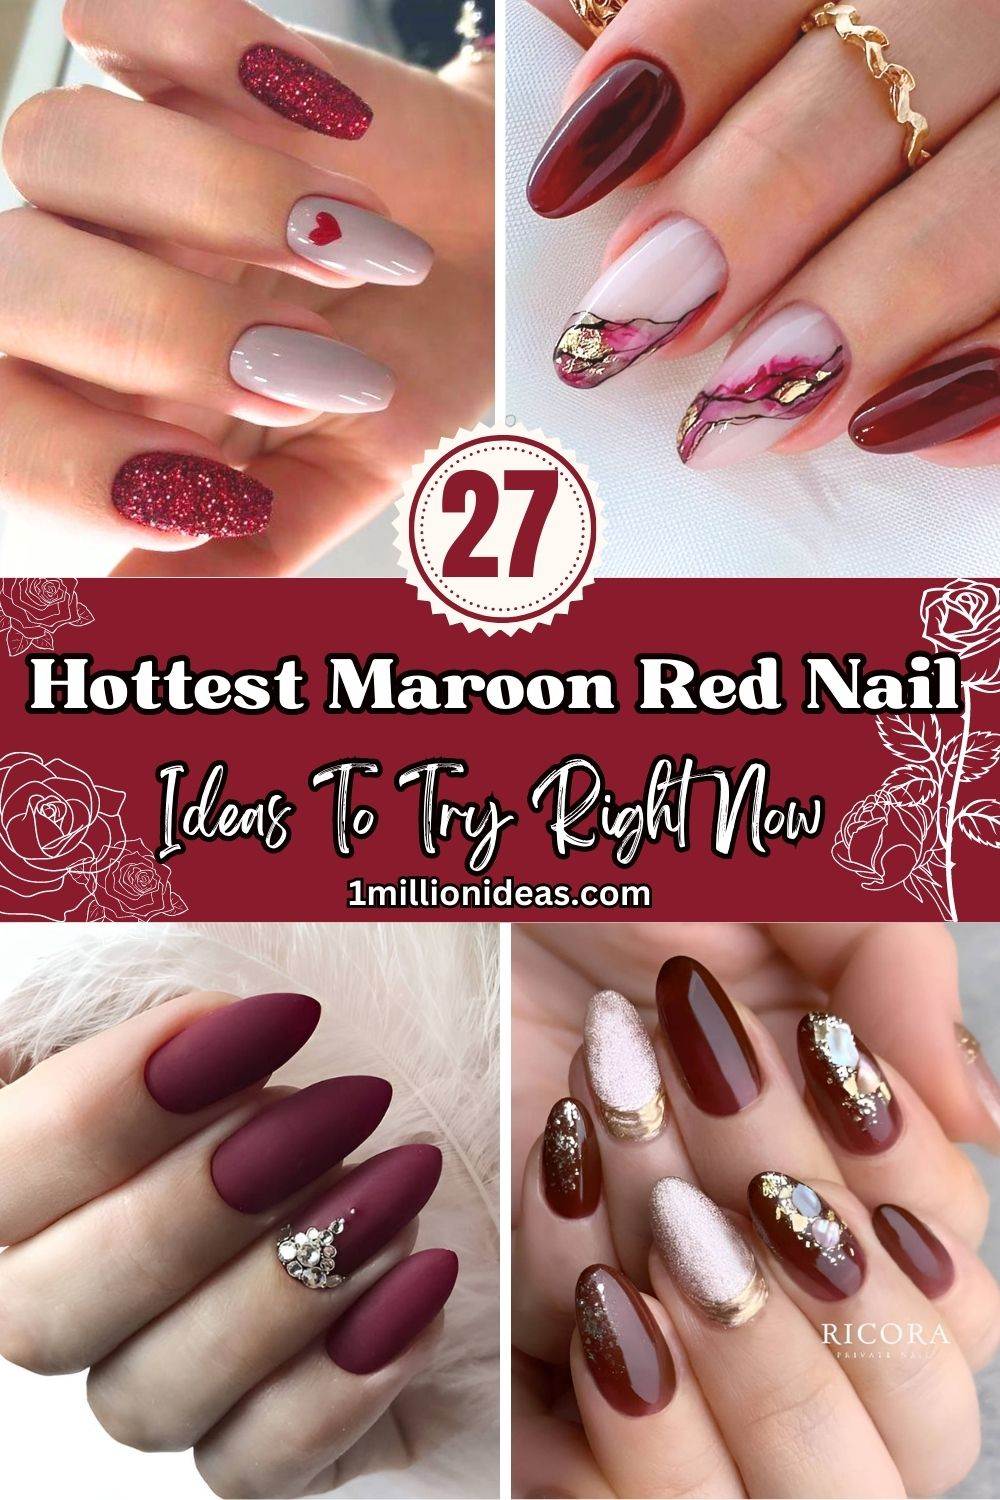 27 Hottest Maroon Red Nail Ideas To Try Right Now - 173